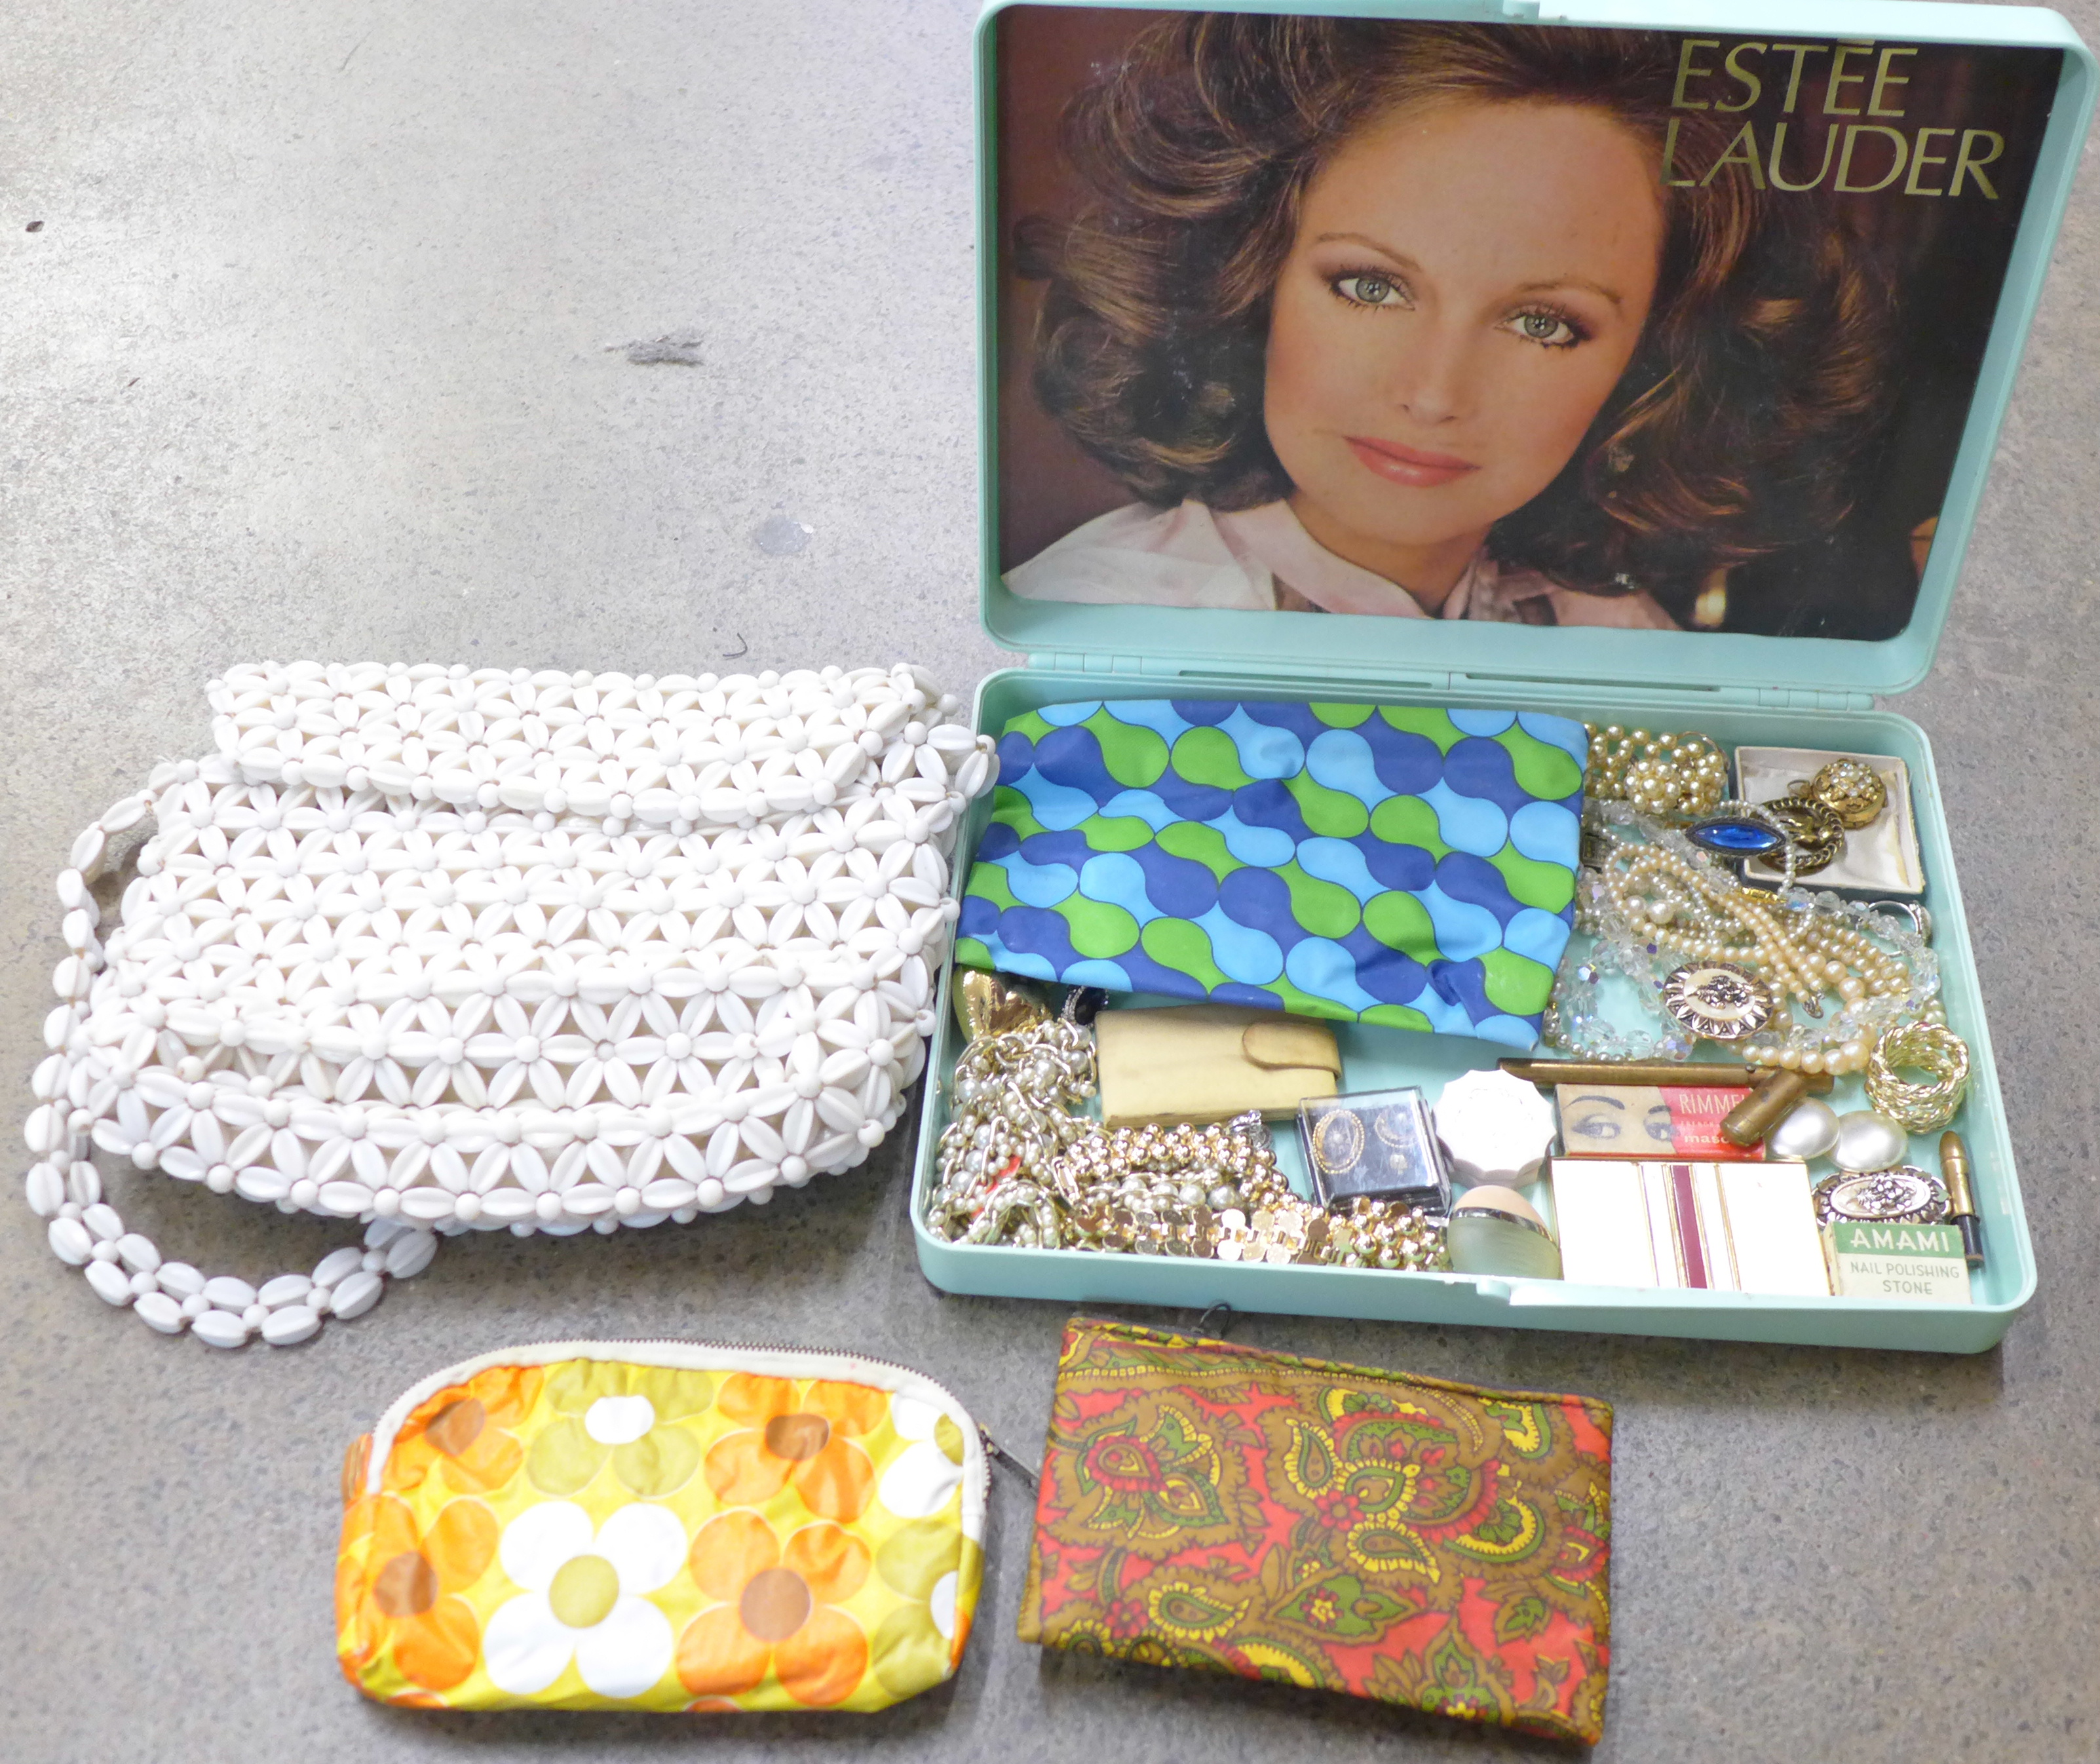 An Estee Lauder box with vintage make up bags, compact, costume jewellery and a bead bag